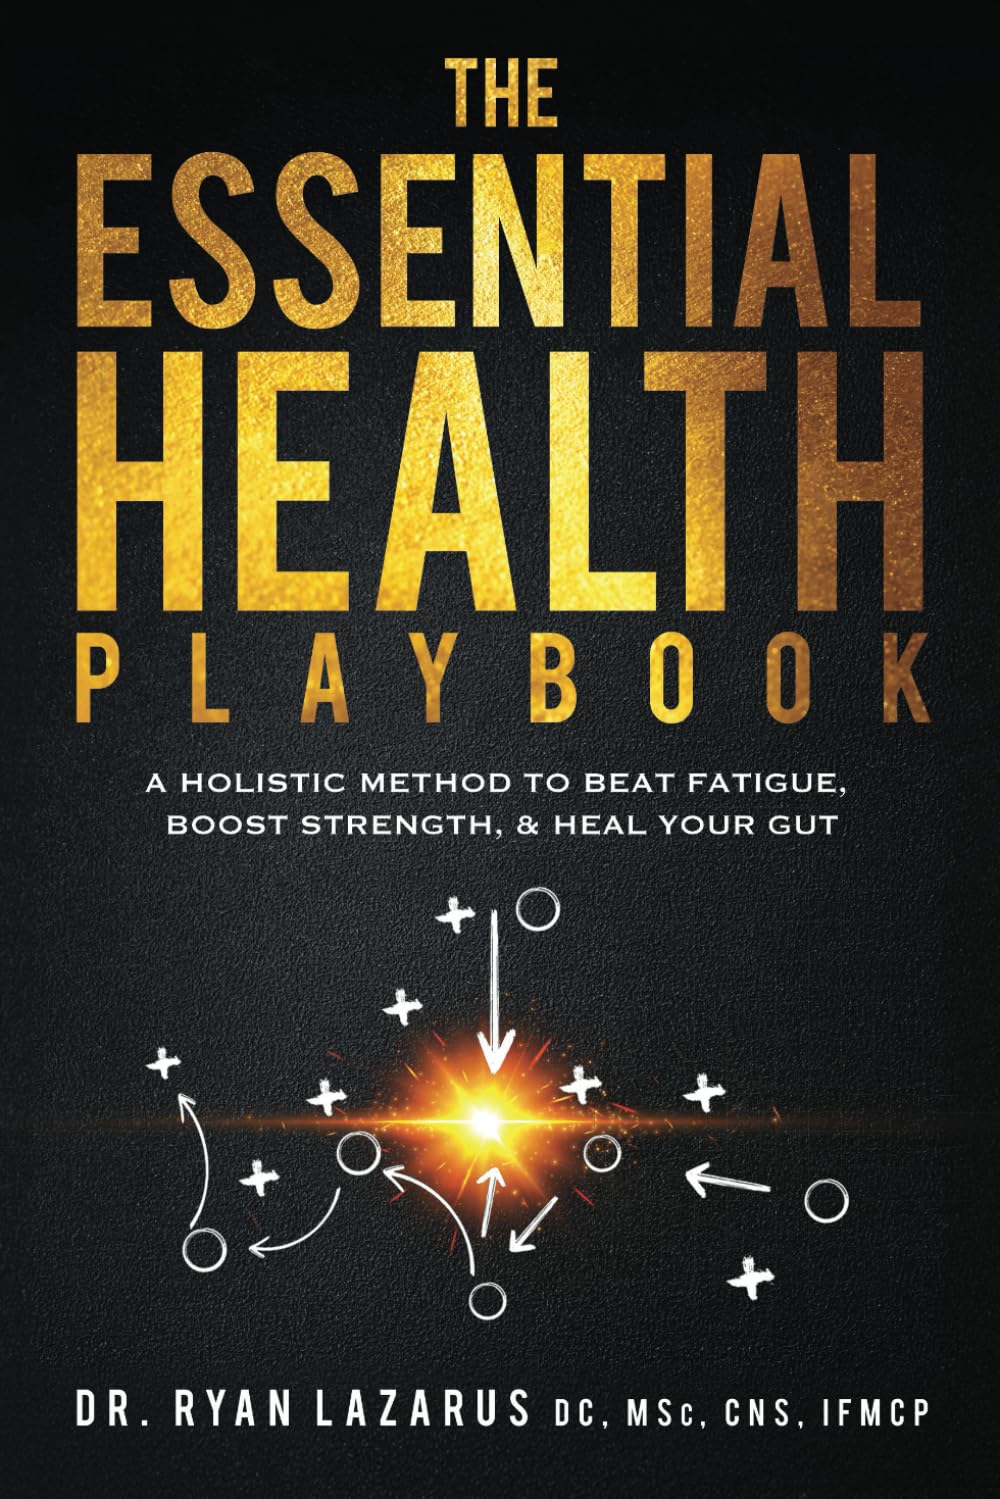 The Essential Health Playbook: A Holistic Method to Beat Fatigue, Boost Strength, & Heal Your Gut